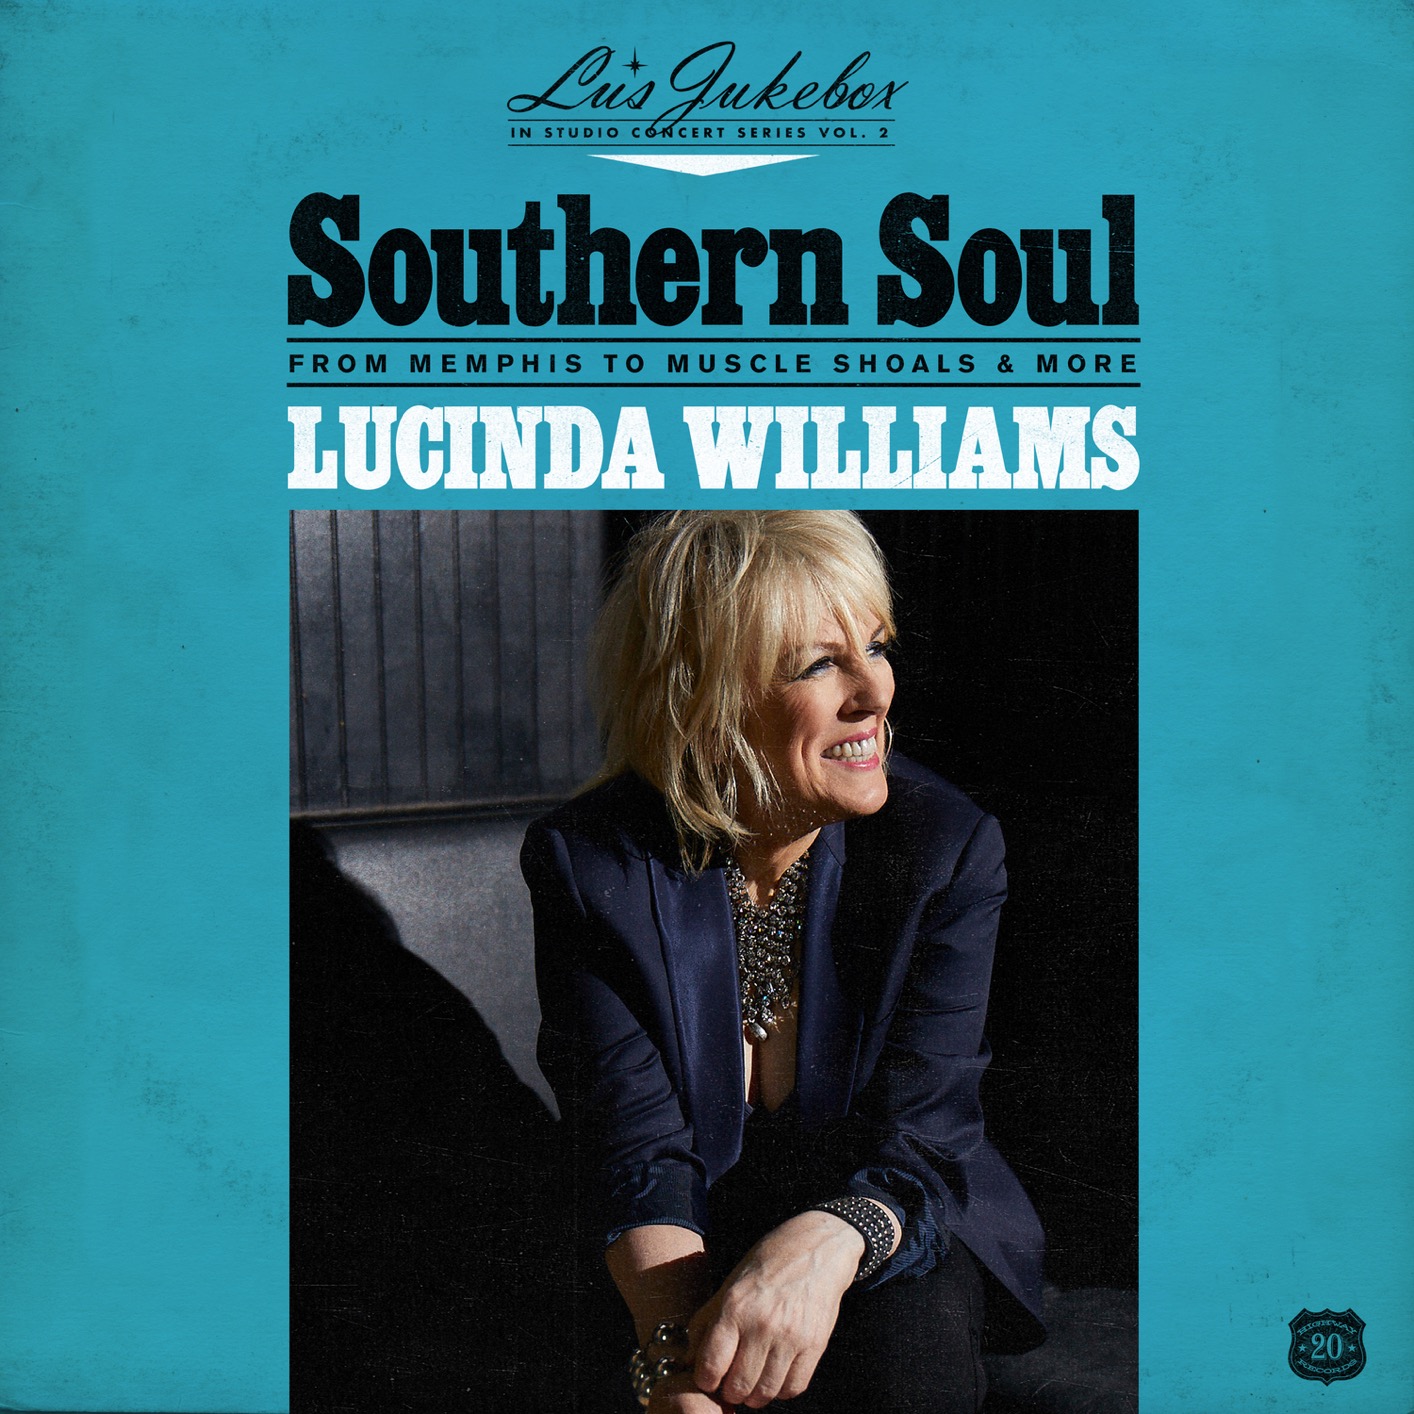 Lucinda Williams - Southern Soul: From Memphis to Muscle Shoals & More (2020) [FLAC 24bit/48kHz]